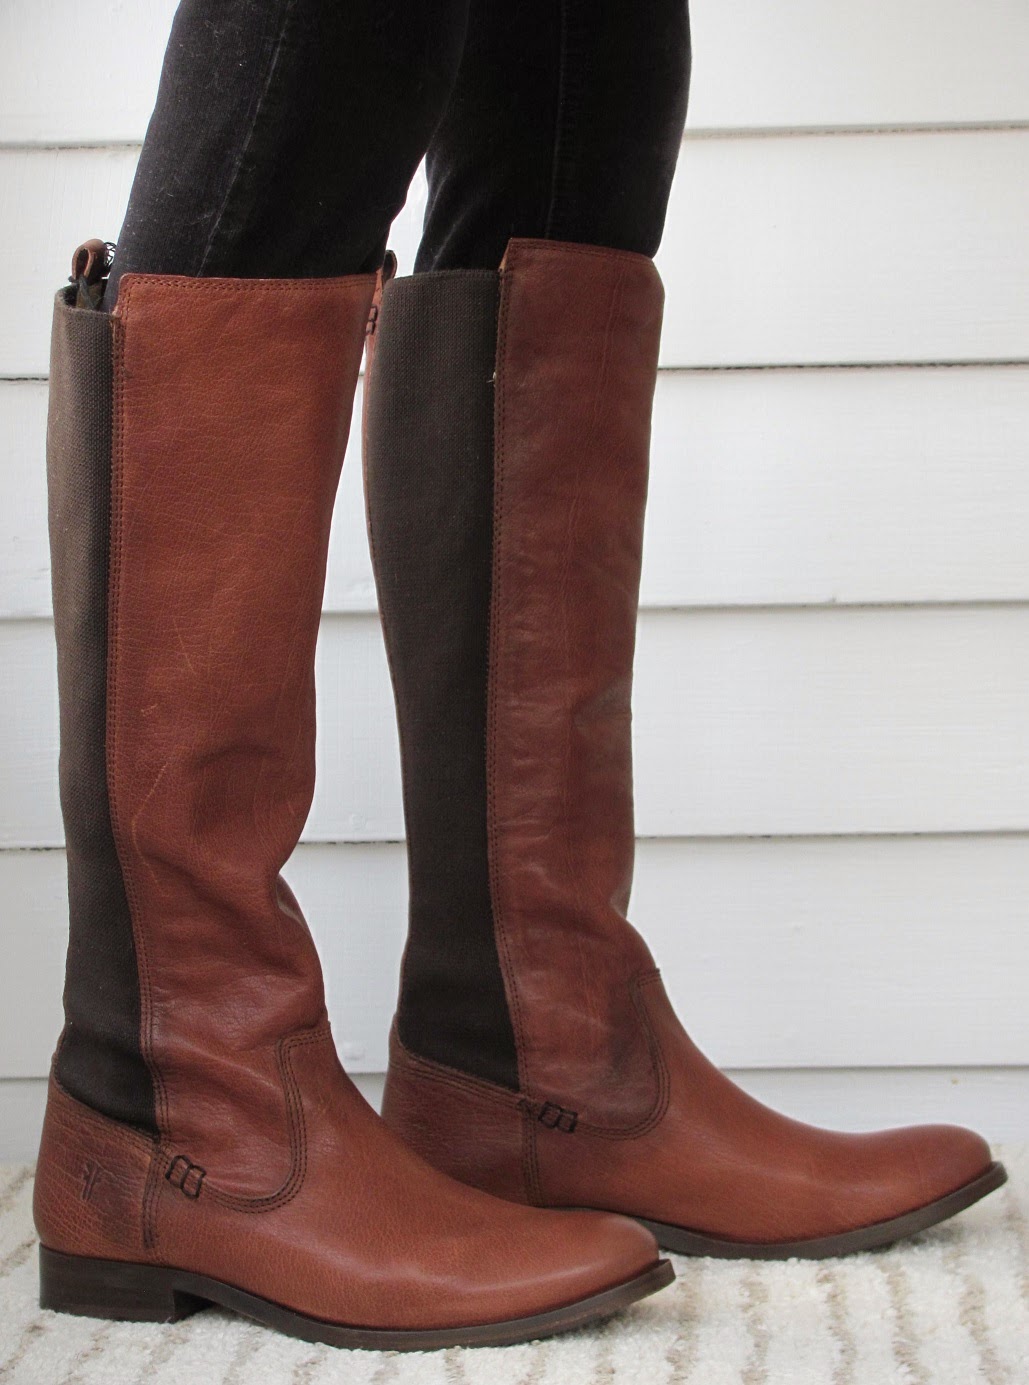 Howdy Slim! Riding Boots for Thin Calves: Frye Molly Gore Tall